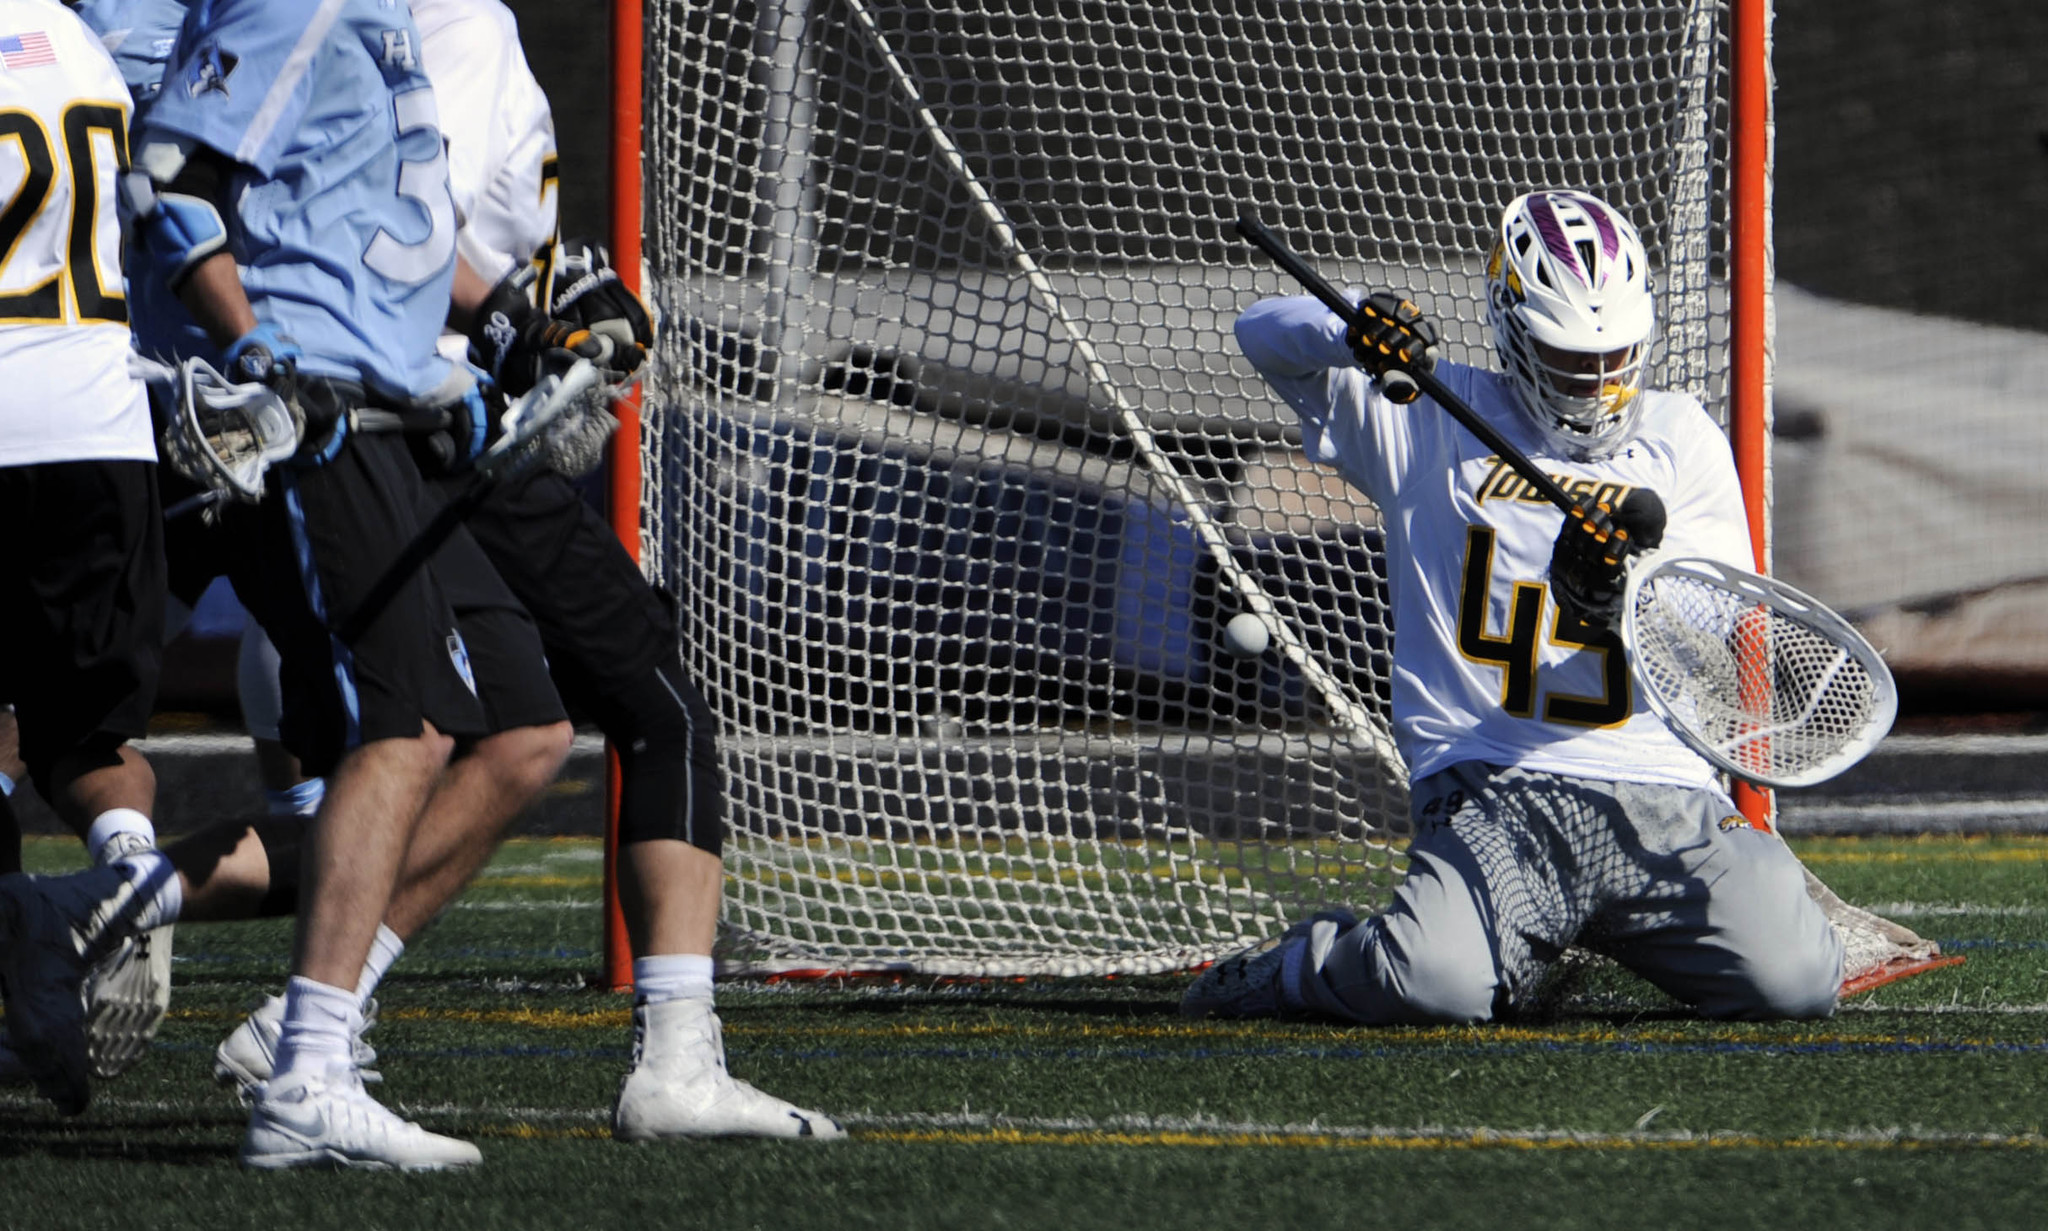 Towson men's lacrosse hoping productive bye weekend pays dividends vs. Denver on Saturday